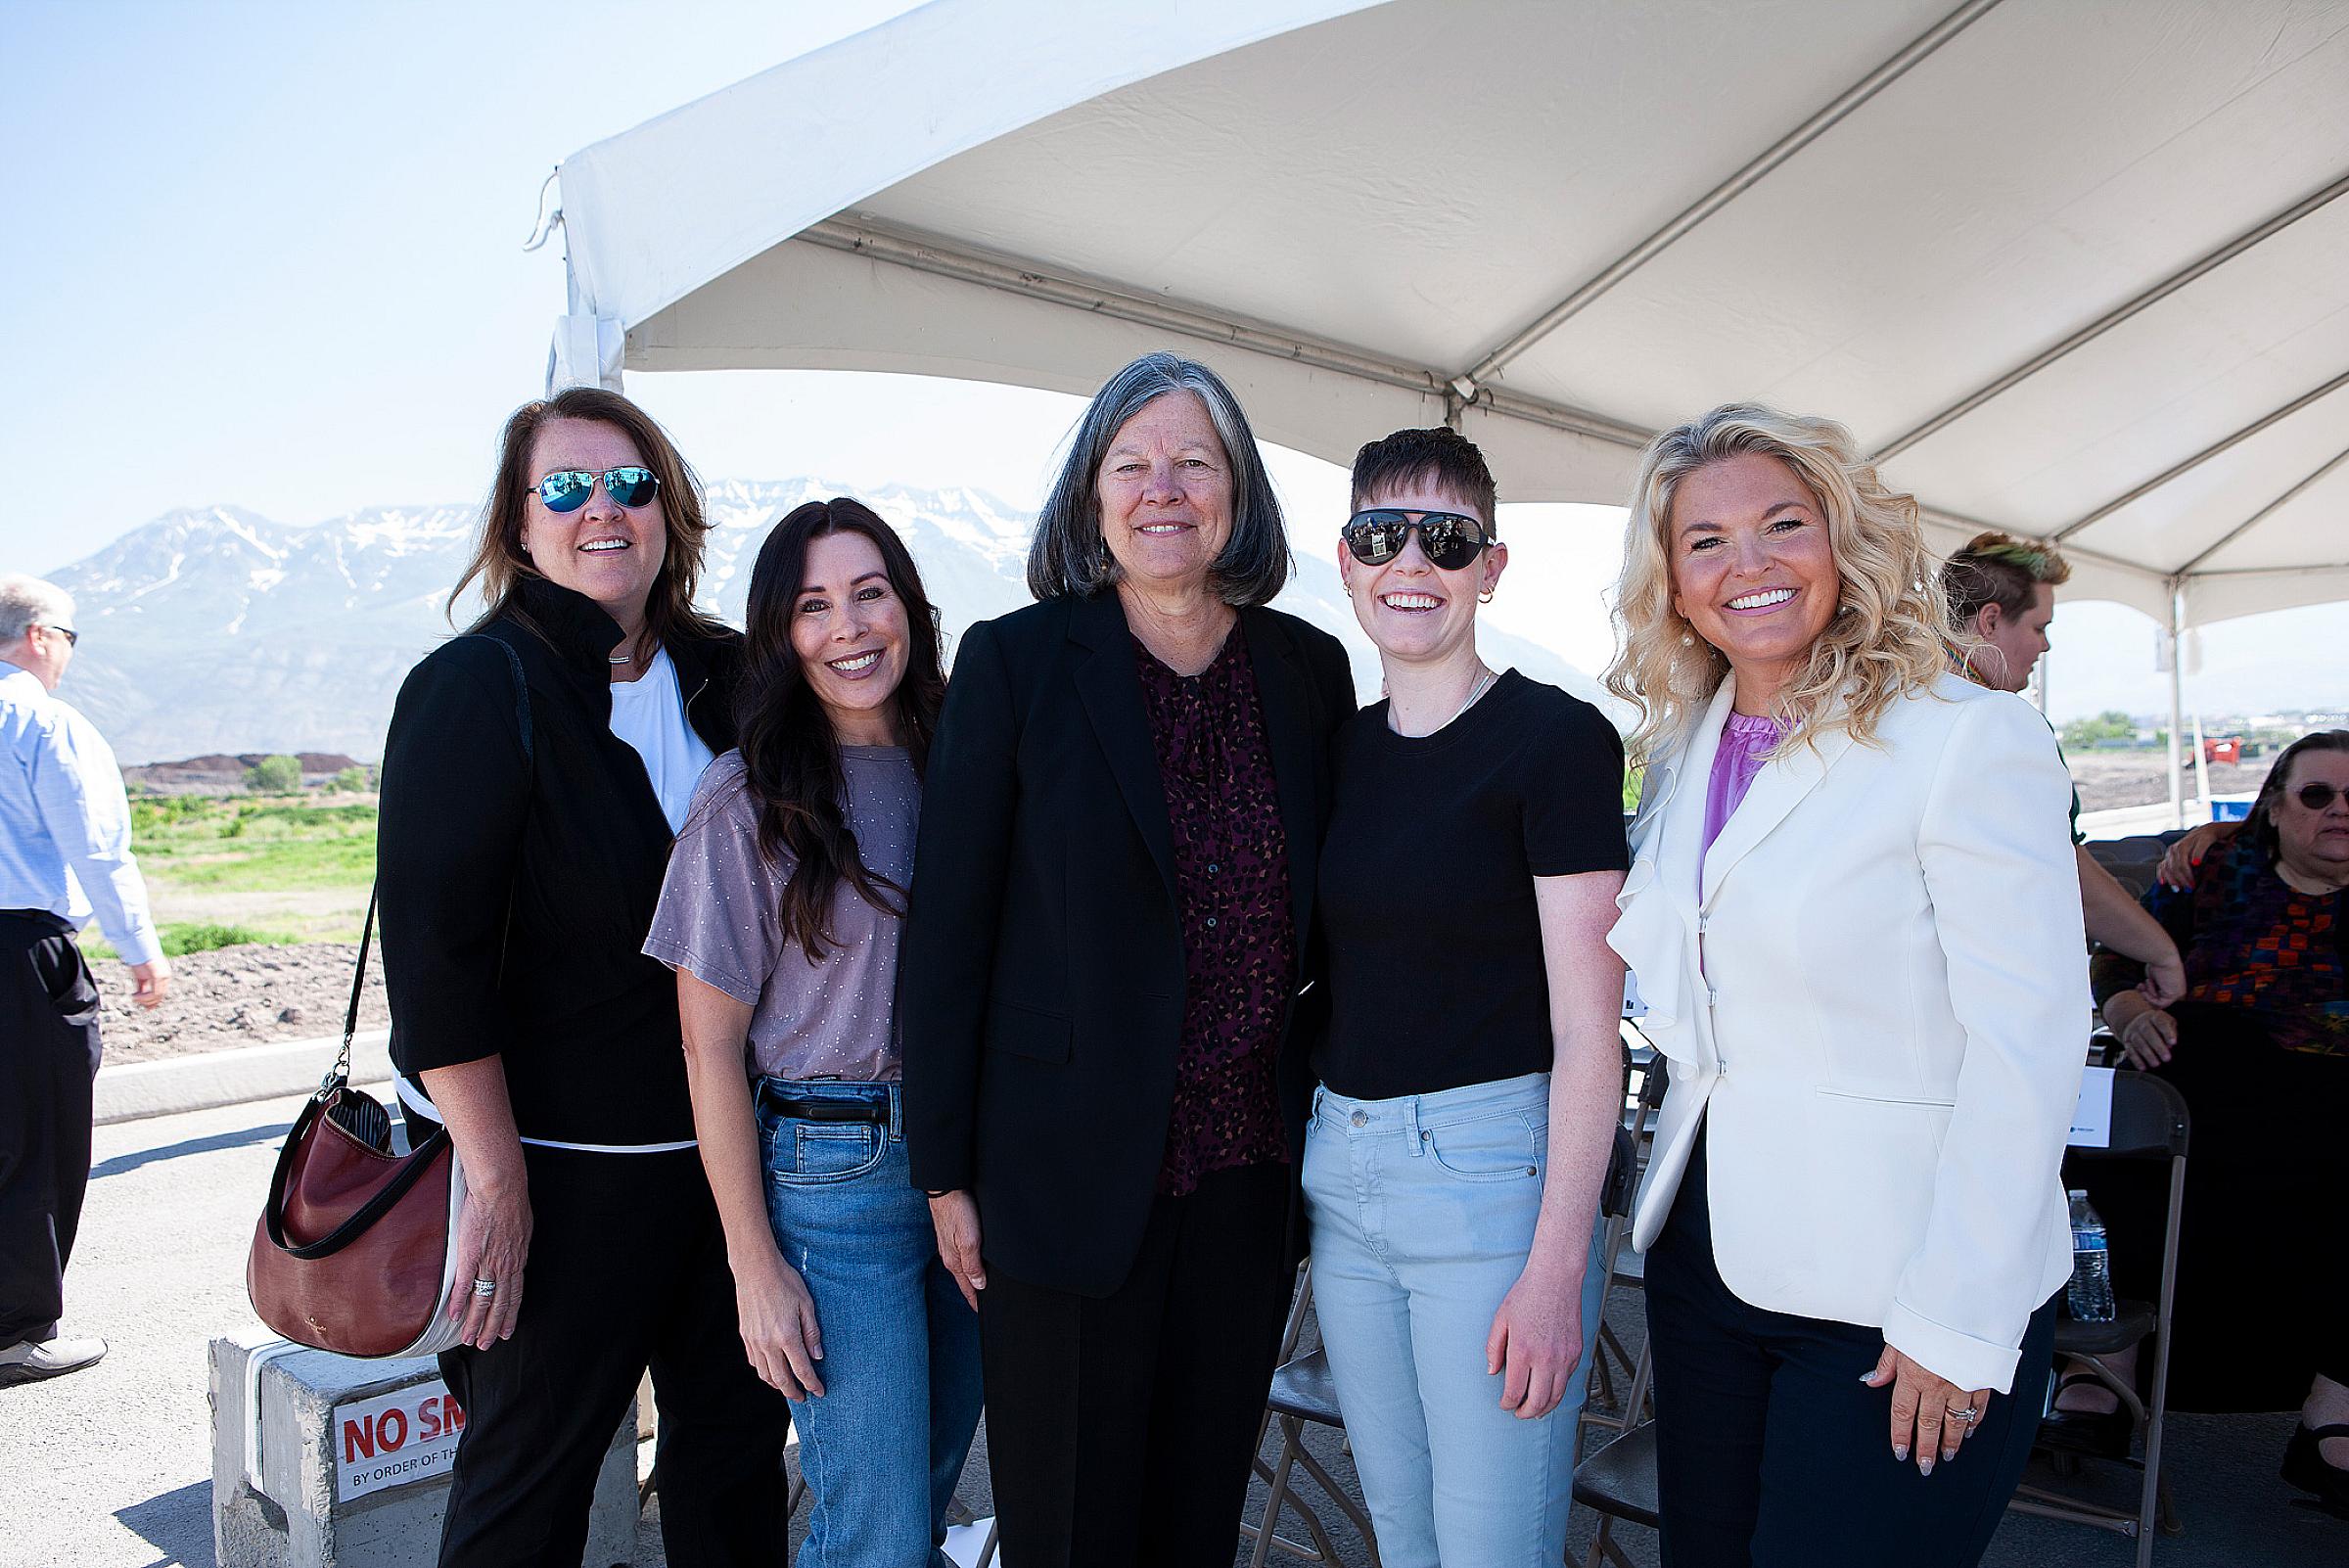 Mary Beckerle (center) and Huntsman Cancer Institute patients (left to right) Carine Clark, Jenni Thompson, Erin Hurst, and Jeanette Bennett